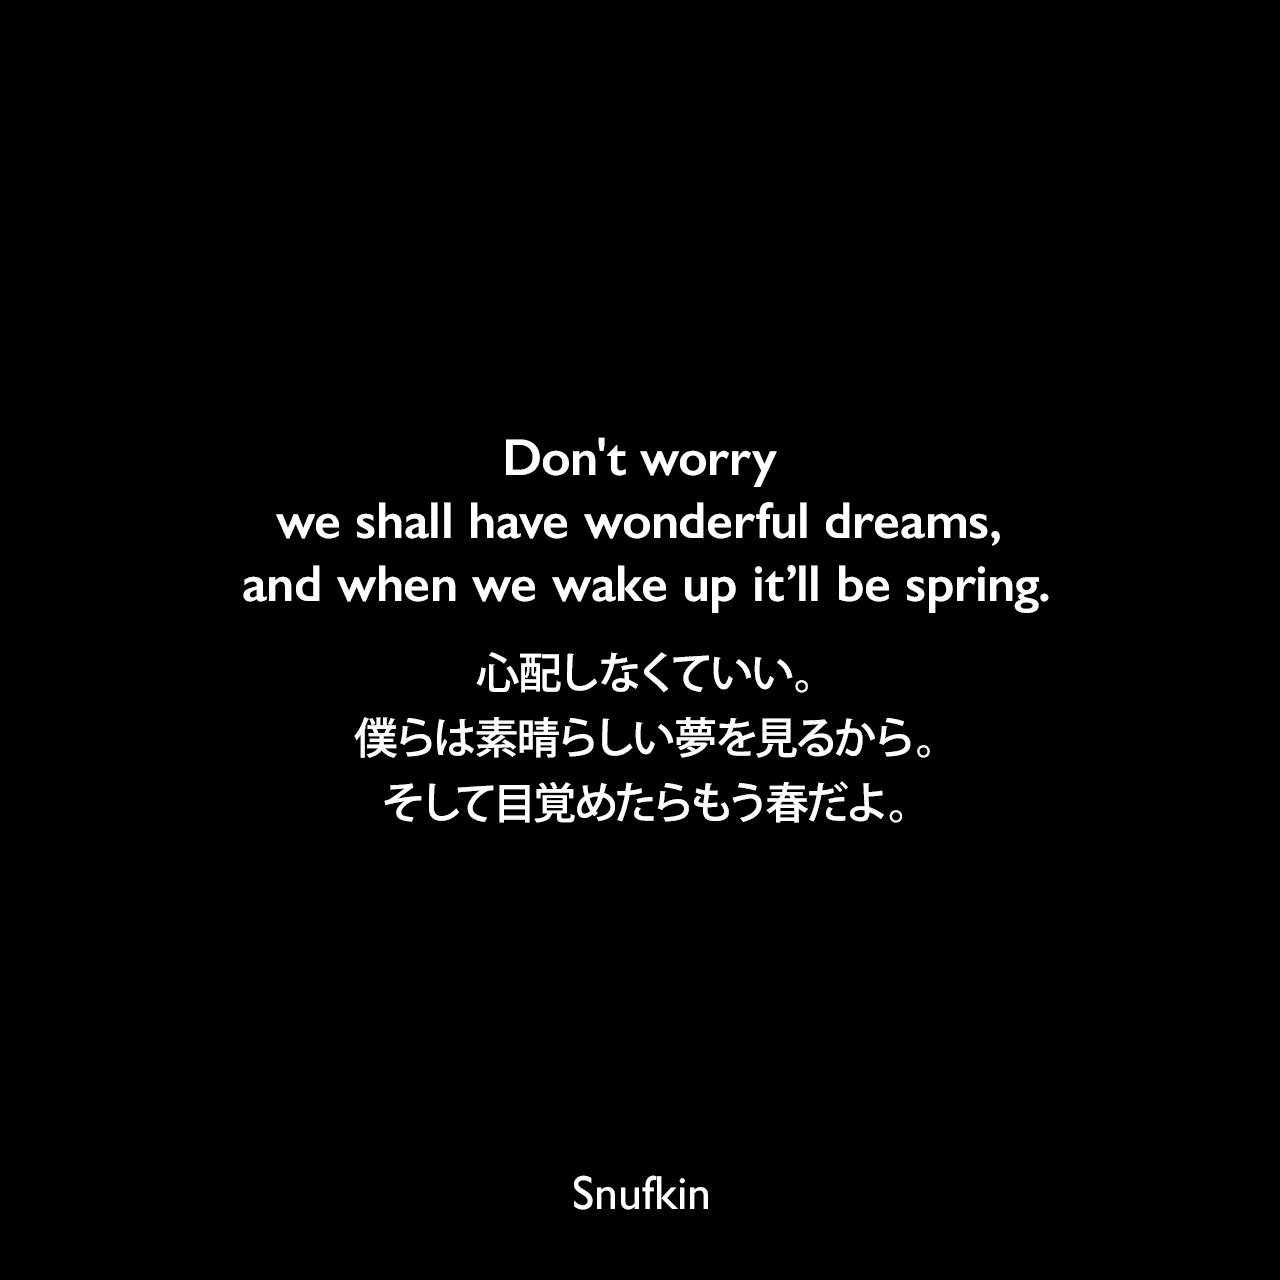 Don't worry we shall have wonderful dreams, and when we wake up it’ll be spring.心配しなくていい。僕らは素晴らしい夢を見るから。そして目覚めたらもう春だよ。- トーベ・ヤンソンによる本「たのしいムーミン一家」よりSnufkin